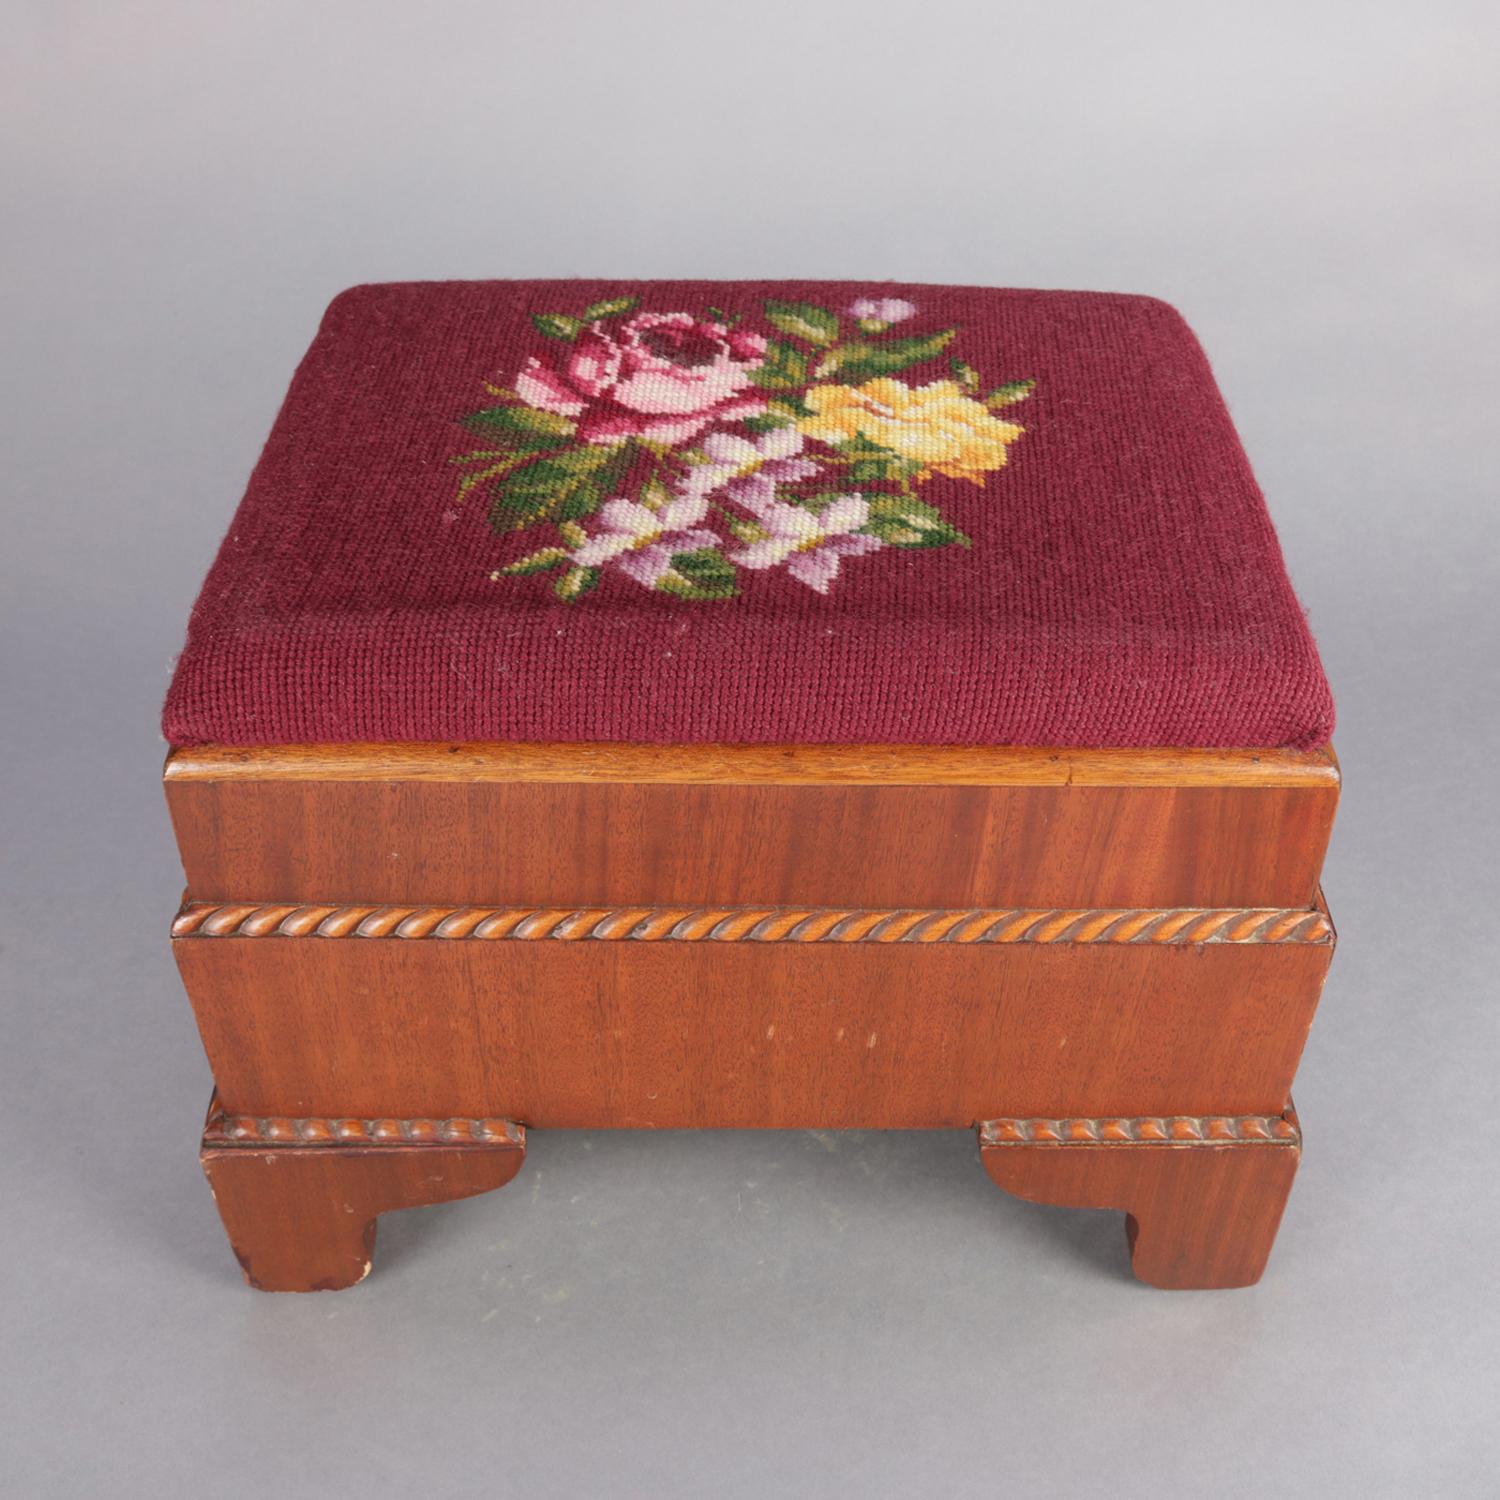 Upholstery Antique American Empire Carved Mahogany and Needlepoint Footstool, 20th Century